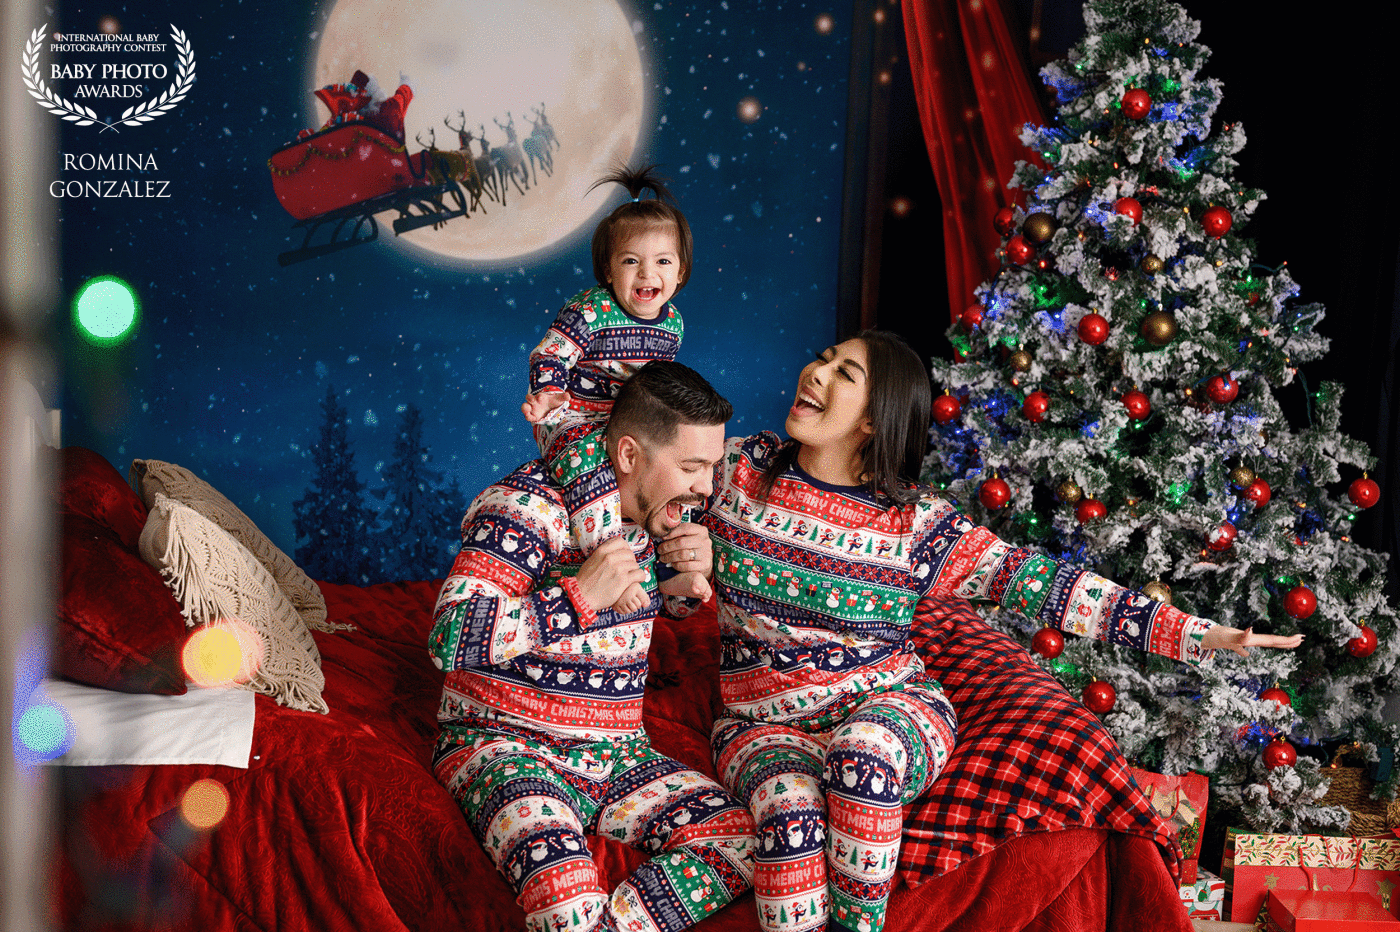 It's Christmas time! <br />
This family enjoyed a beautiful moment during their Christmas session. The second Christmas with their baby Camila.